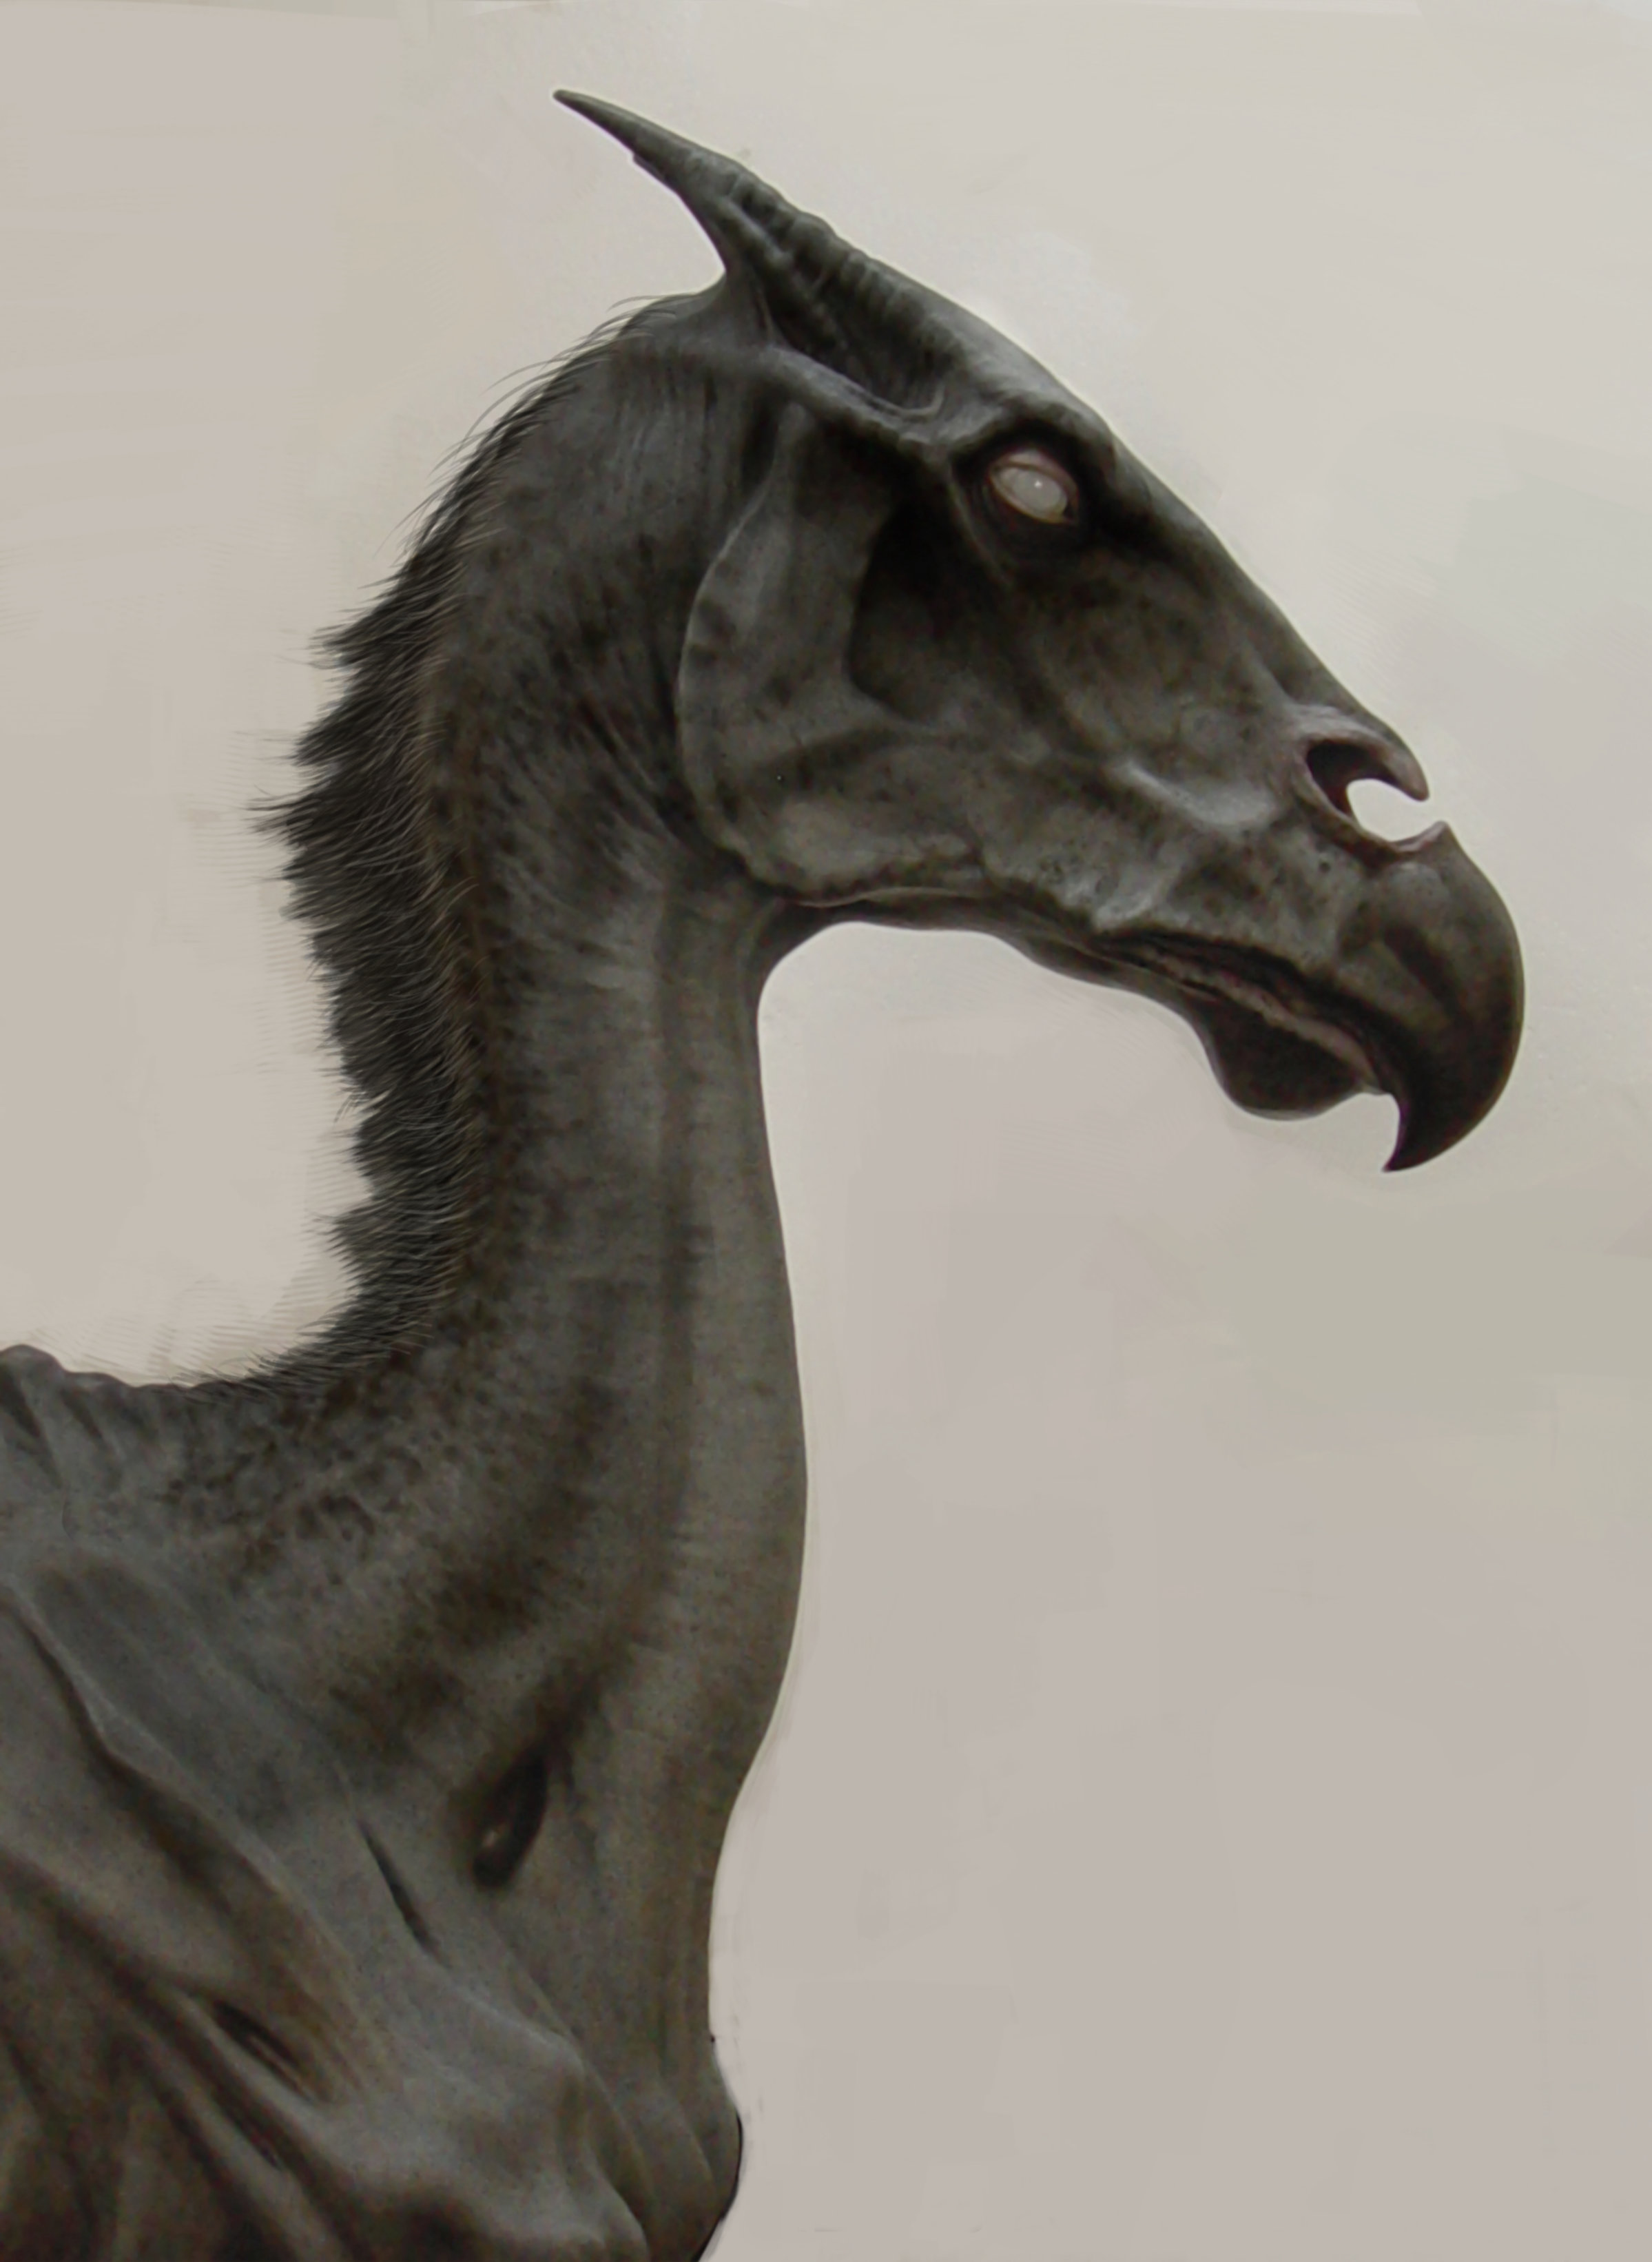 Thestra, skeletal looking black horse, facing right.